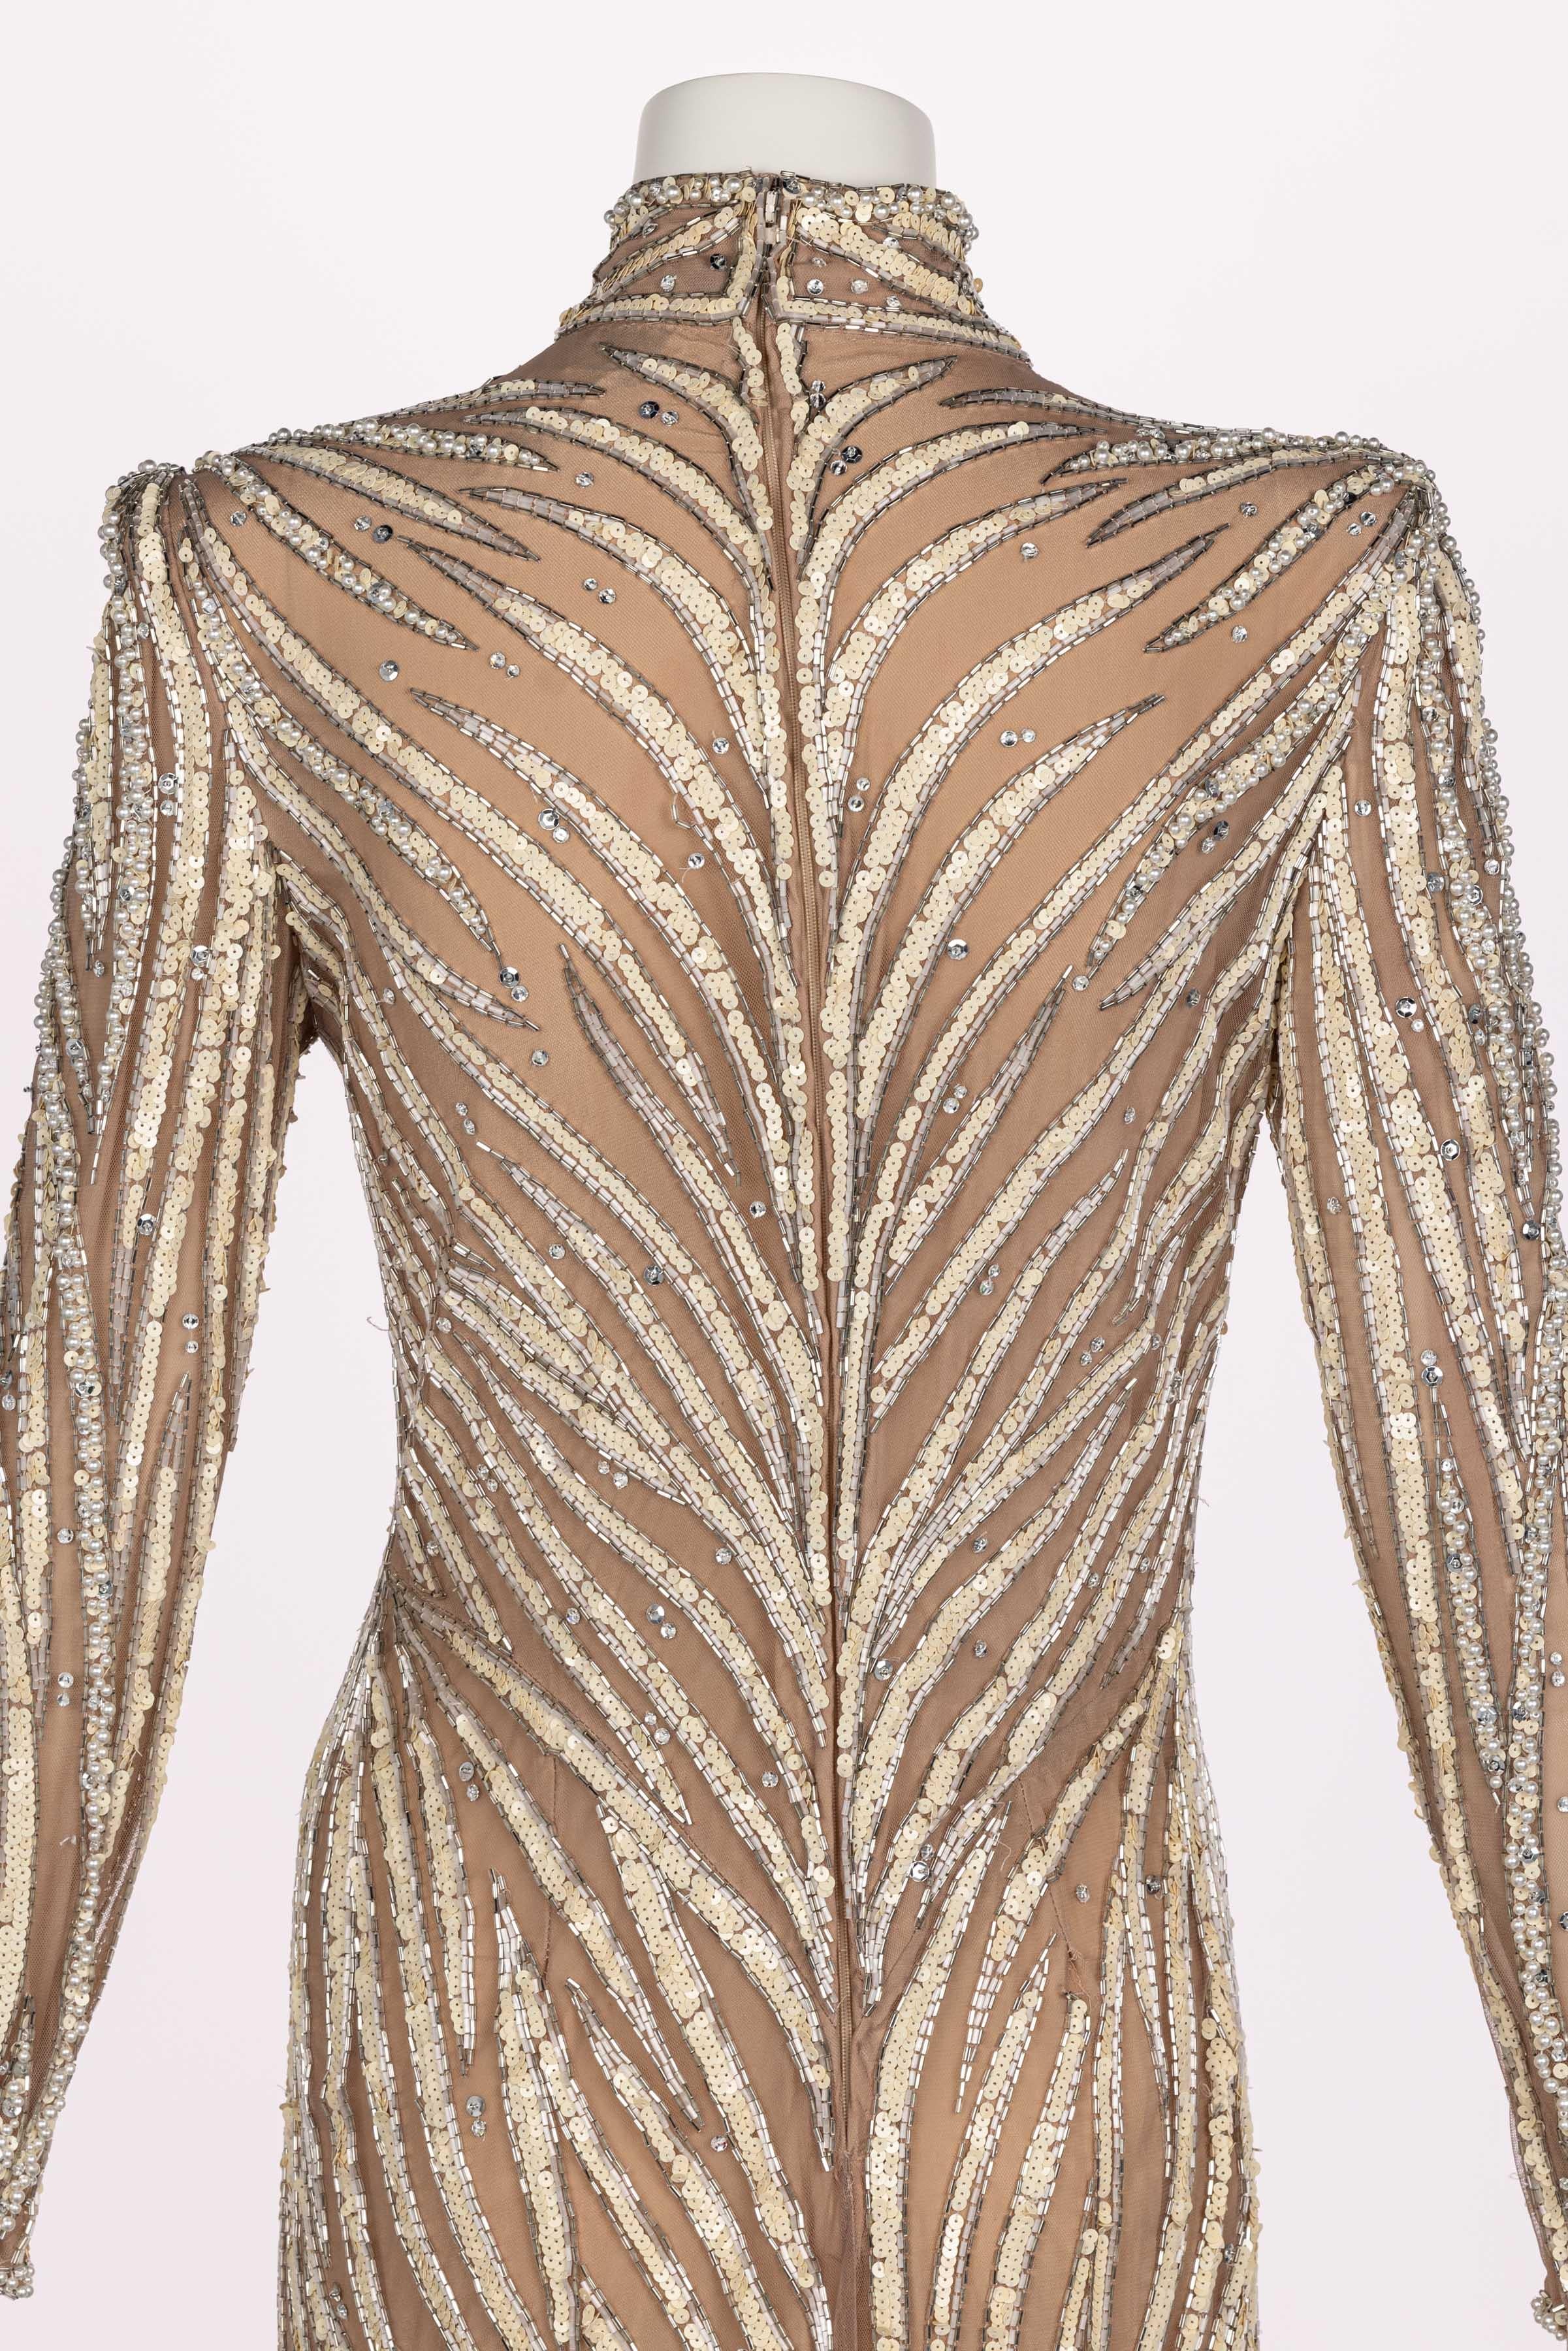 Bob Mackie Ivory Sequin, Pearls & Nude Stretch Net Thigh High Slit Dress, 1980s For Sale 3